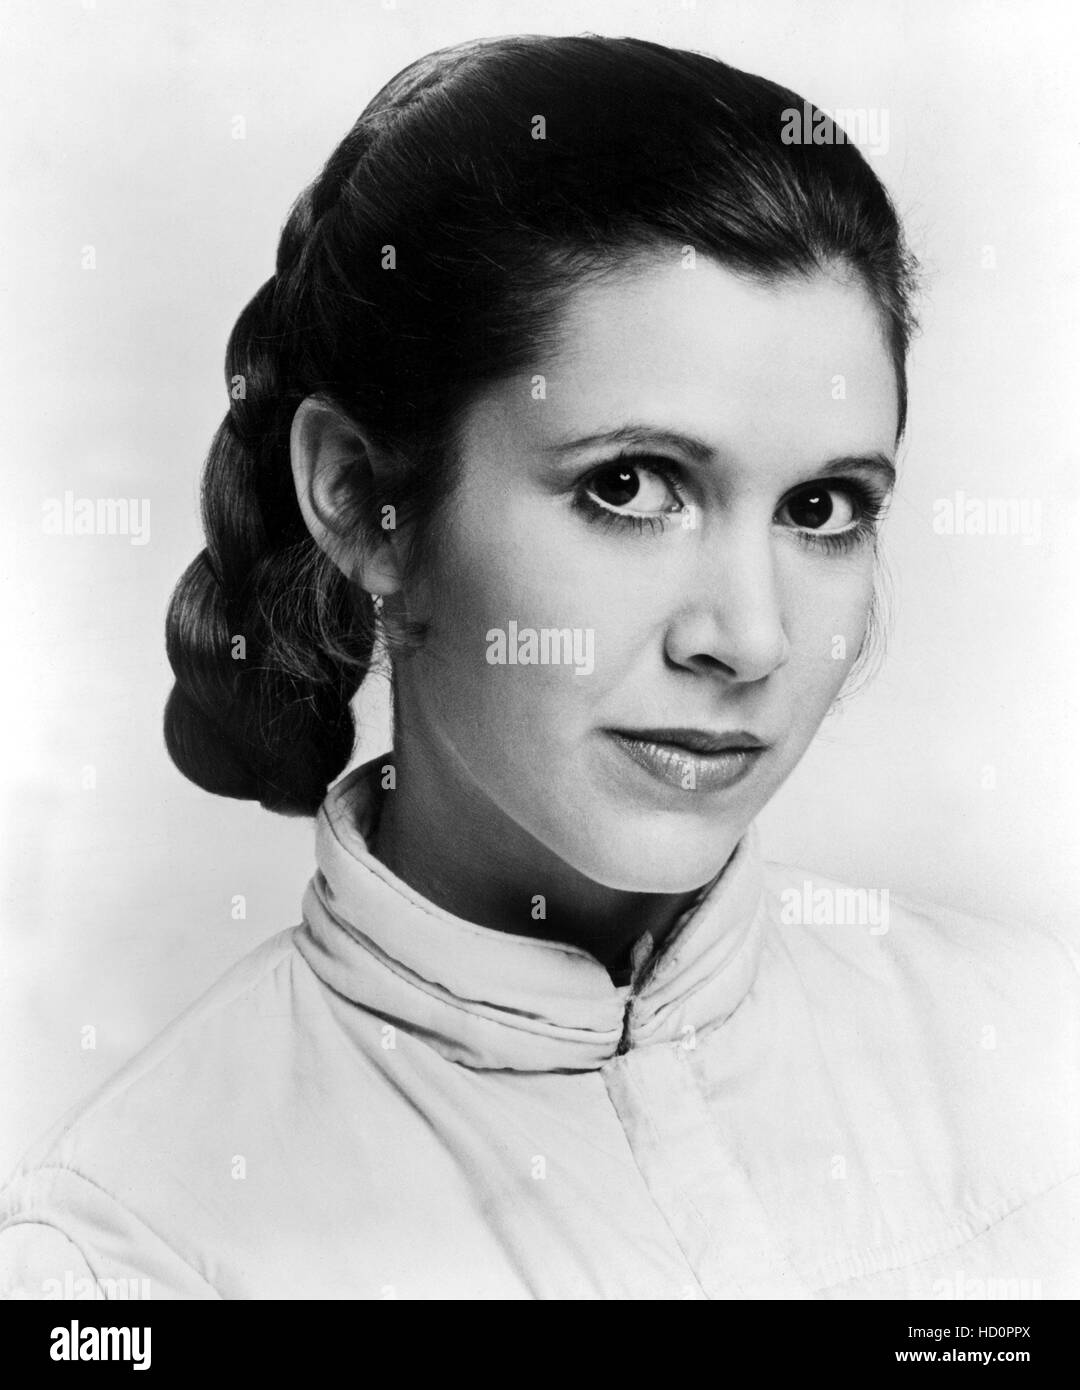 STAR WARS: EPISODE IV - A NEW HOPE, Carrie Fisher, 1977. (c) Lucas Films/Courtesy Everett Collection. Stock Photo